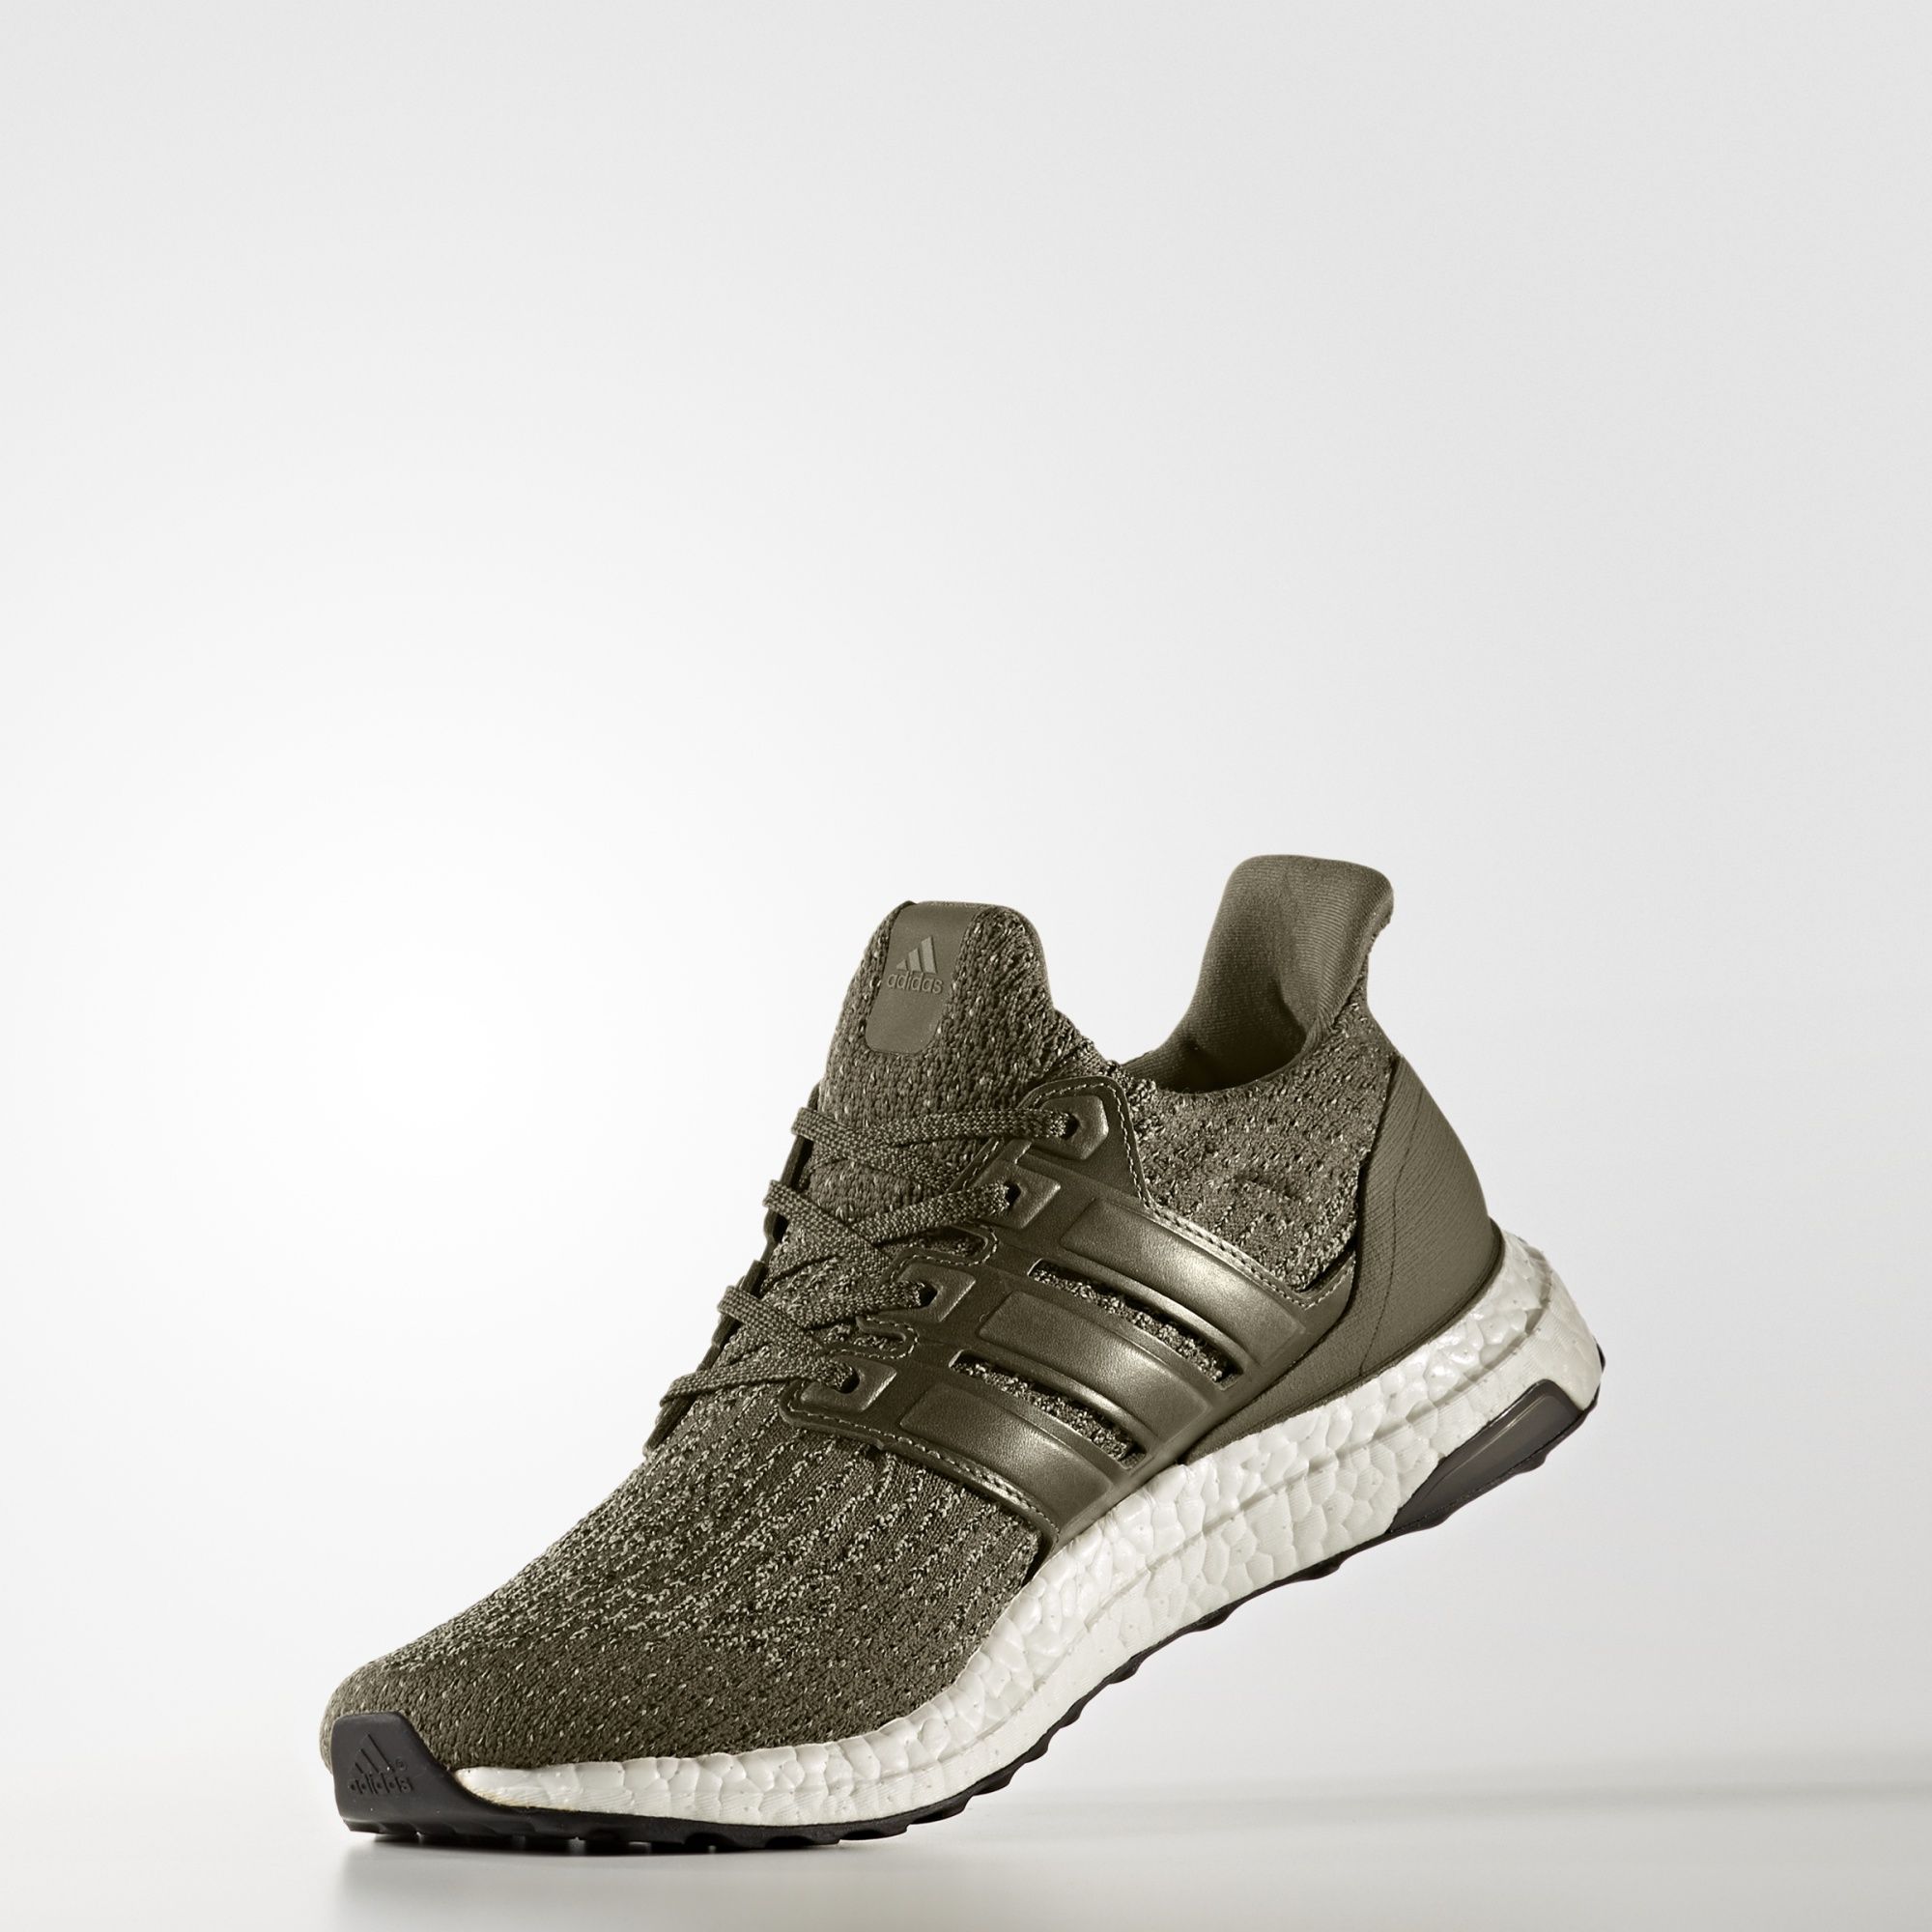 adidas-ultra-boost-3-0-trace-olive-3